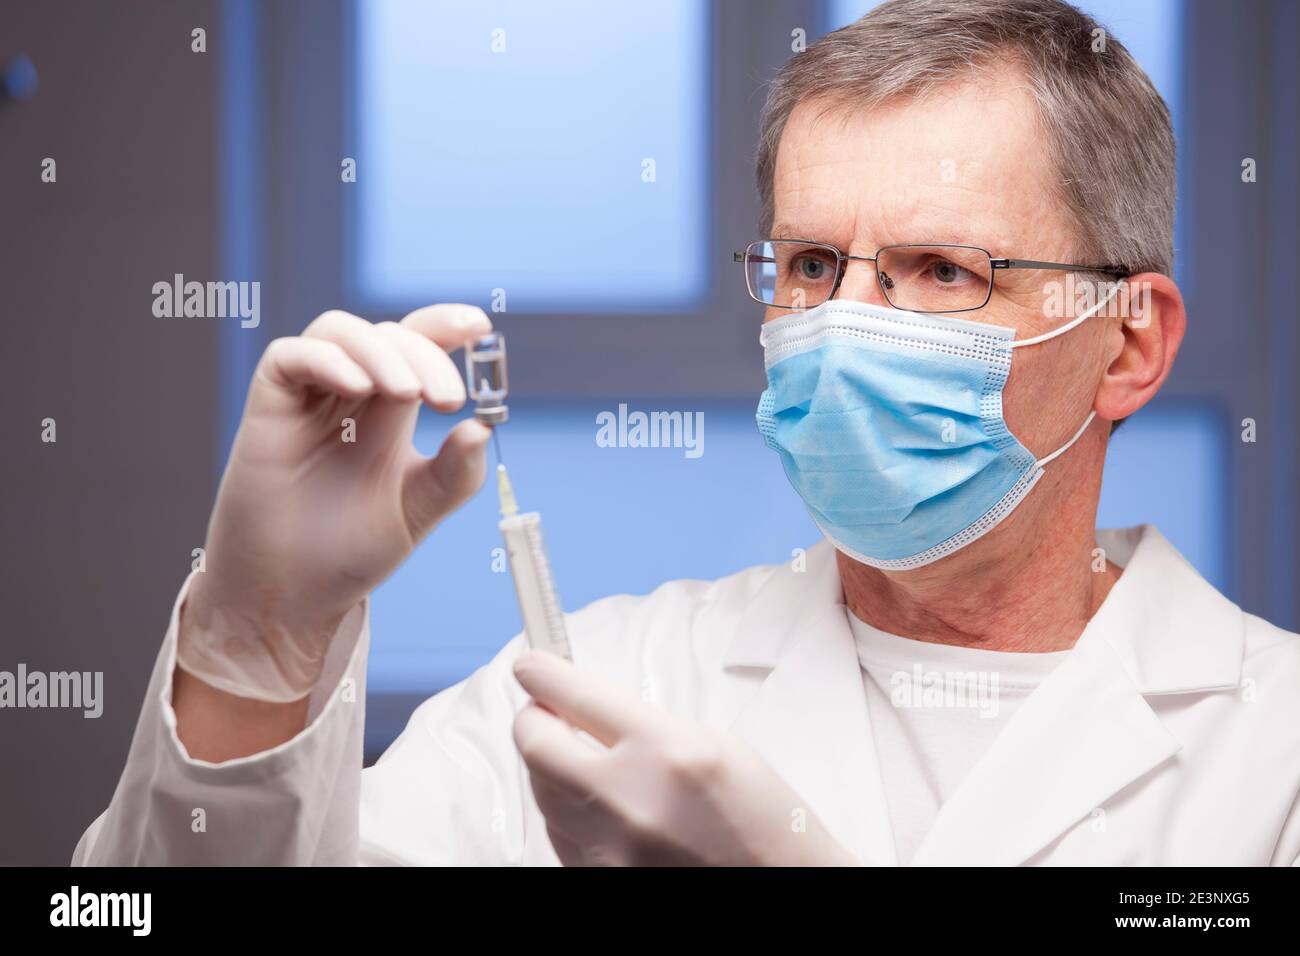 Doctor with medical mask preparing a syringe for vaccination against covid-19 - focus on the face Stock Photo